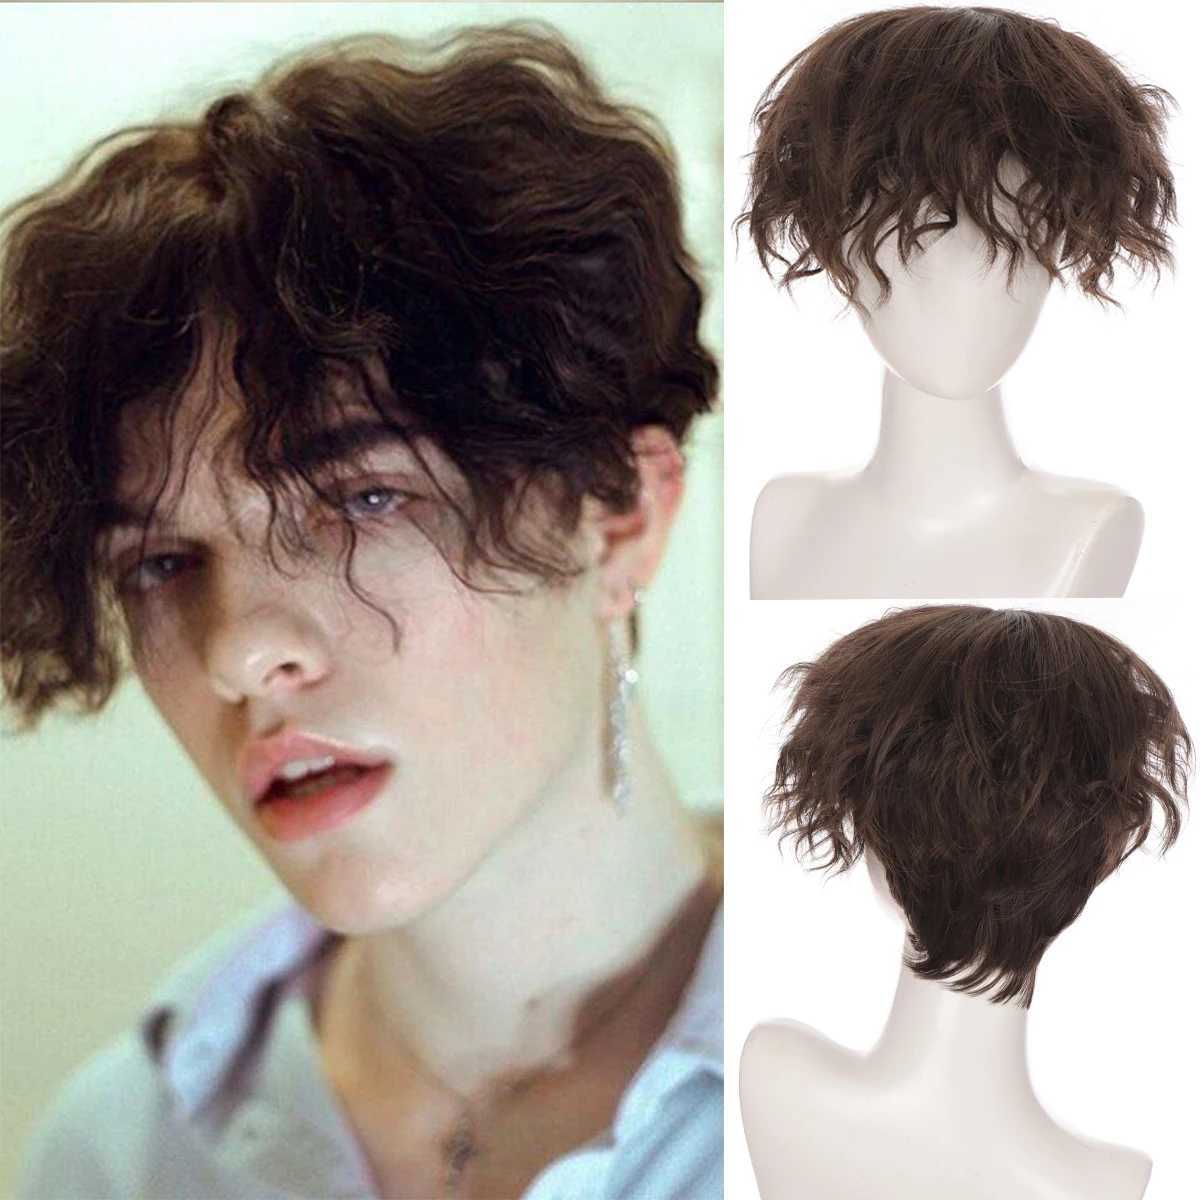 Synthetic Wigs Lace Wigs MSTN Synthetic Good Quality Short Curly Wigs for Men Boys Black Blonde Hair Halloween Party Wig Heat Resistant Daily Cosplay Wig 240327